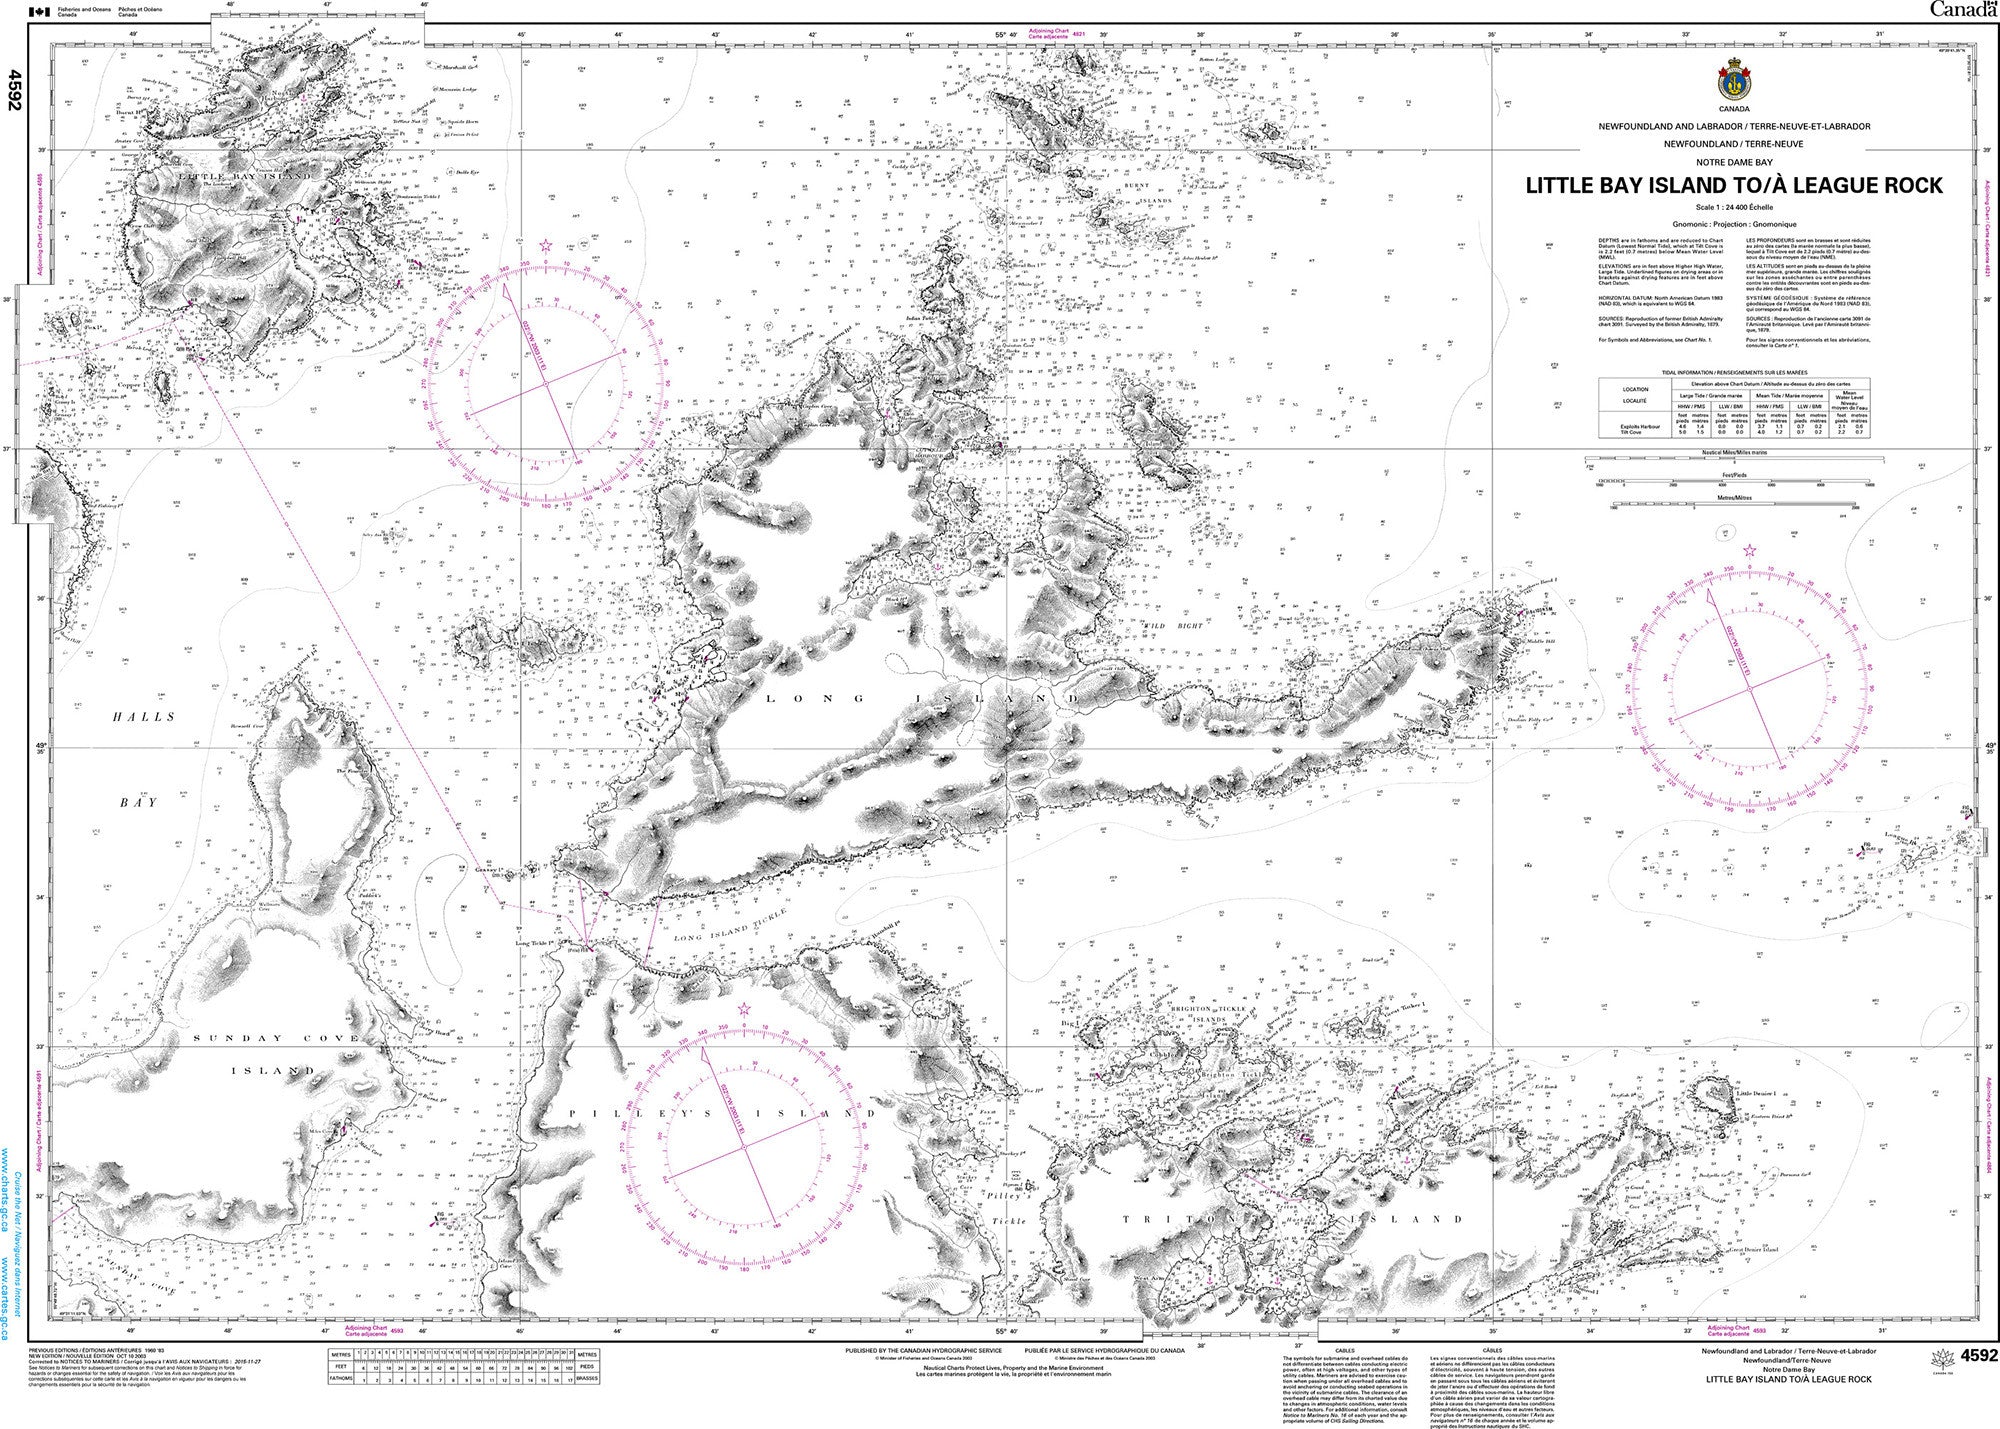 Canadian Hydrographic Service Nautical Chart CHS4592: Little Bay Island to/à League Rock